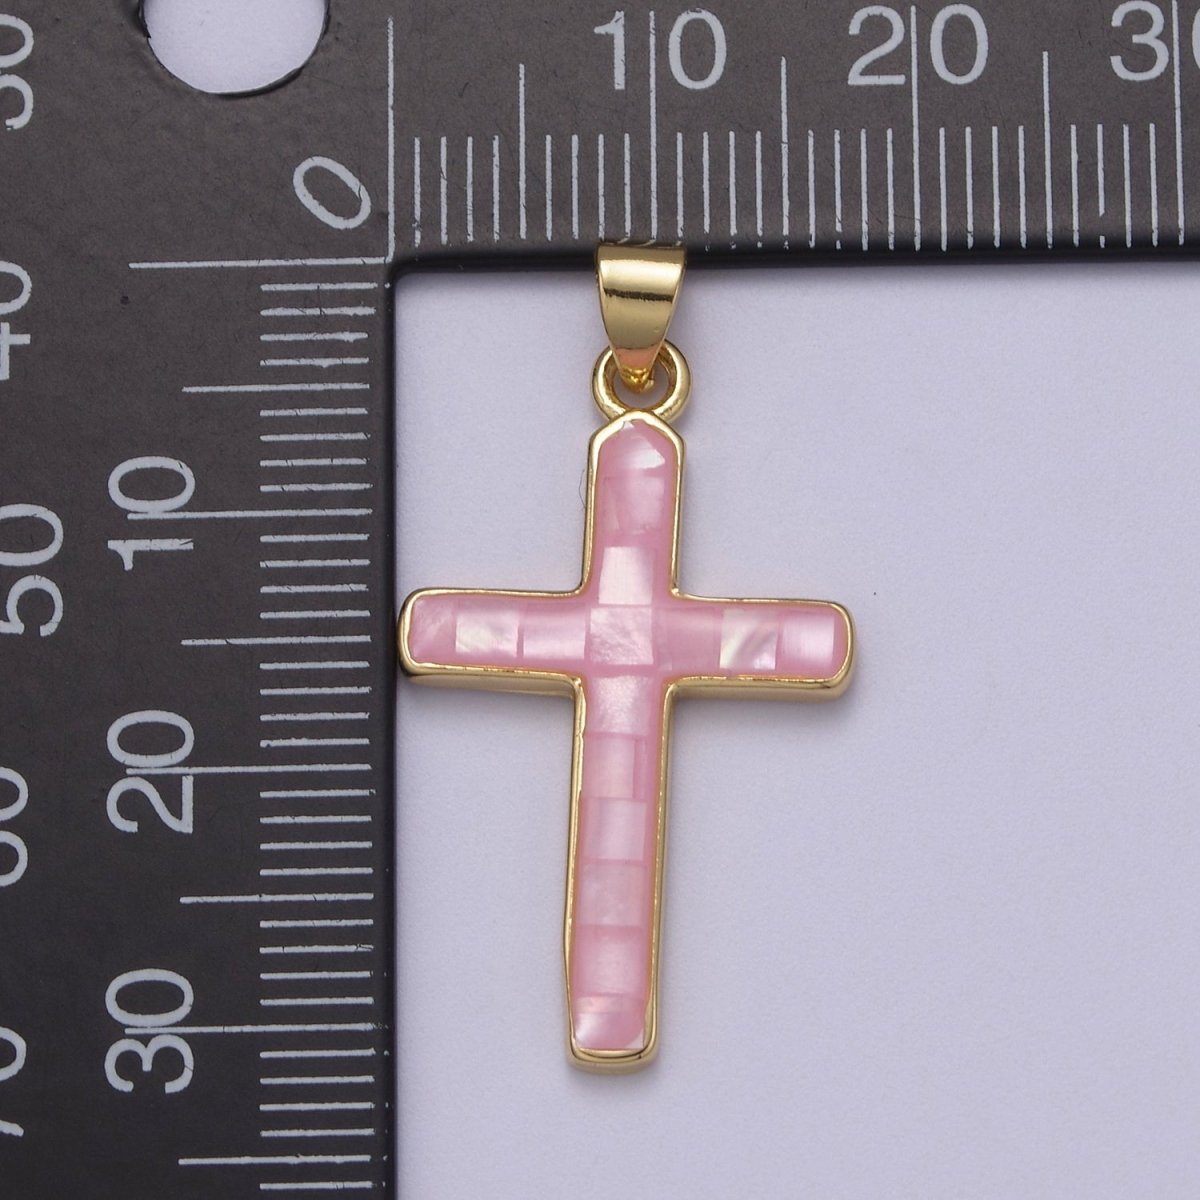 24K Gold Filled Pink / Green / Blue Opal Shell Religious Minimalist Cross Pendant H-745 H-747 H-763 - DLUXCA